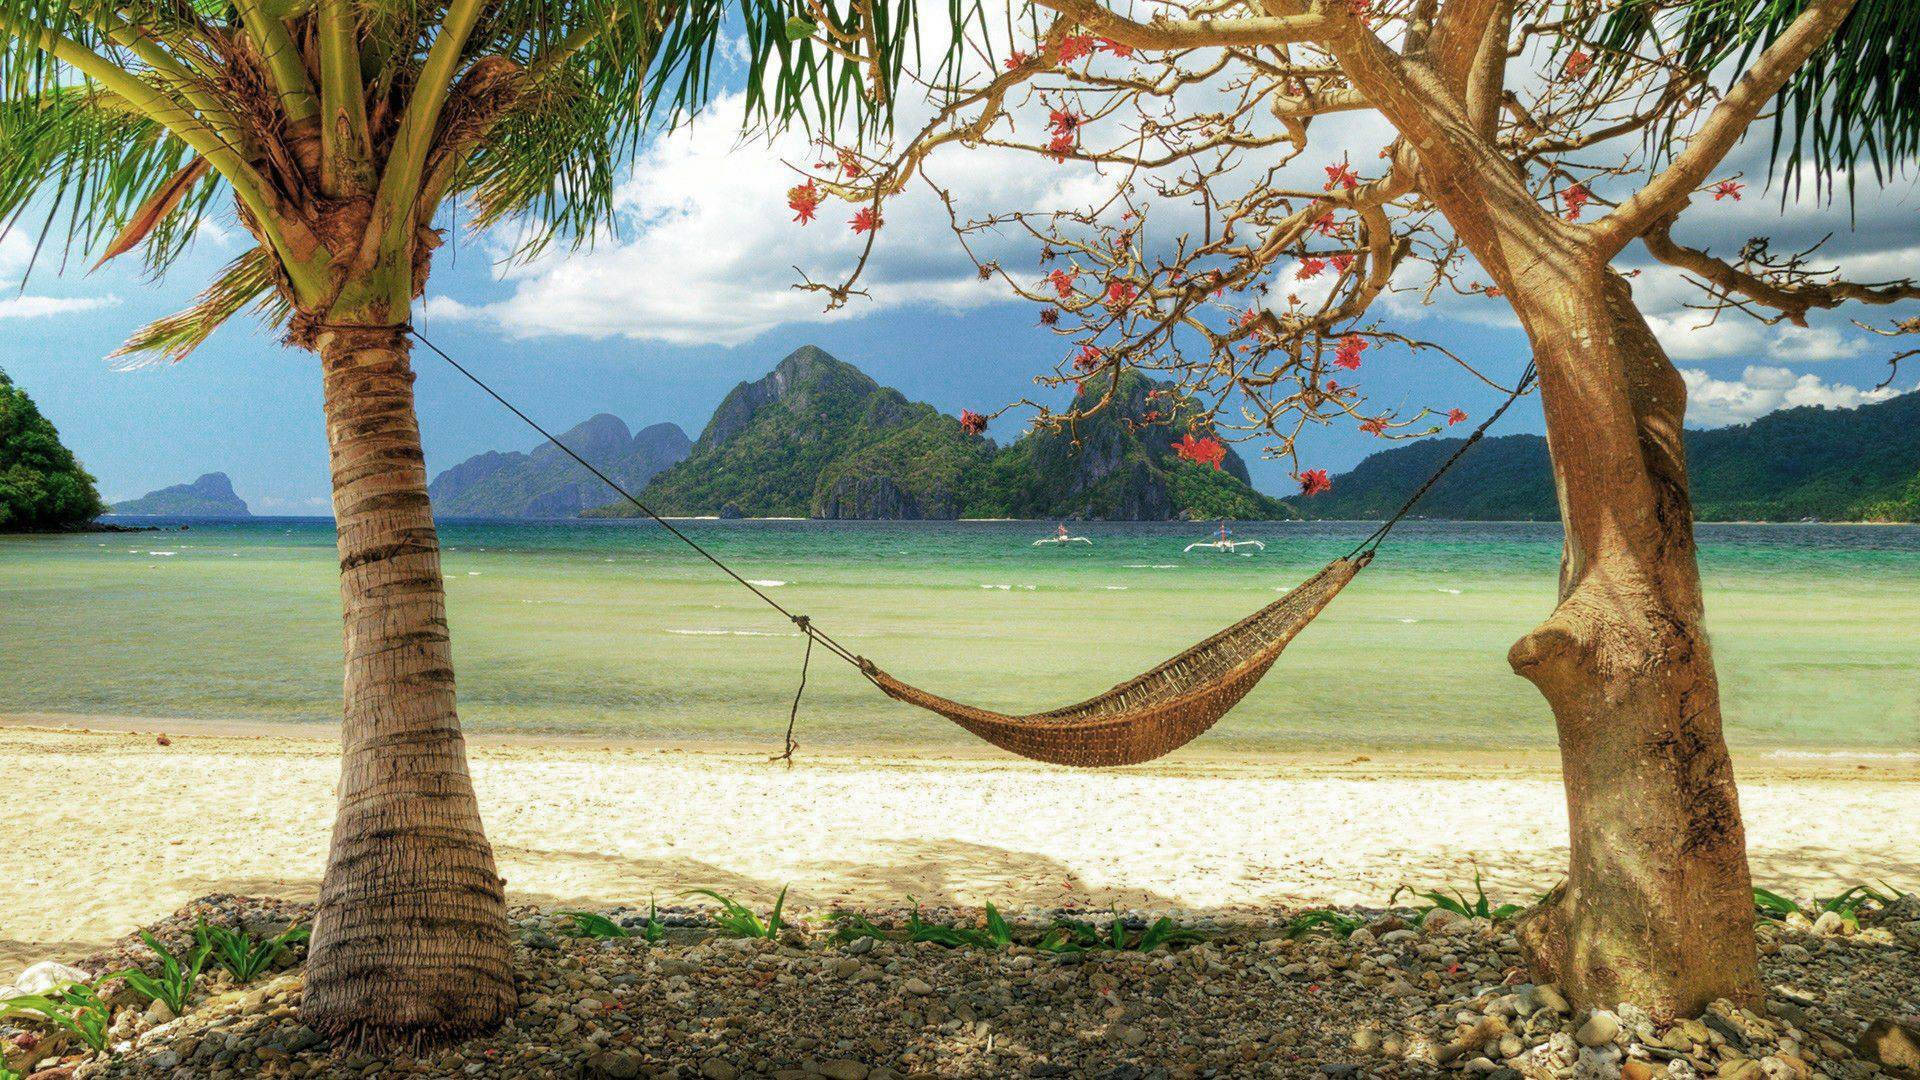 Beach View Of The Philippines Wallpaper